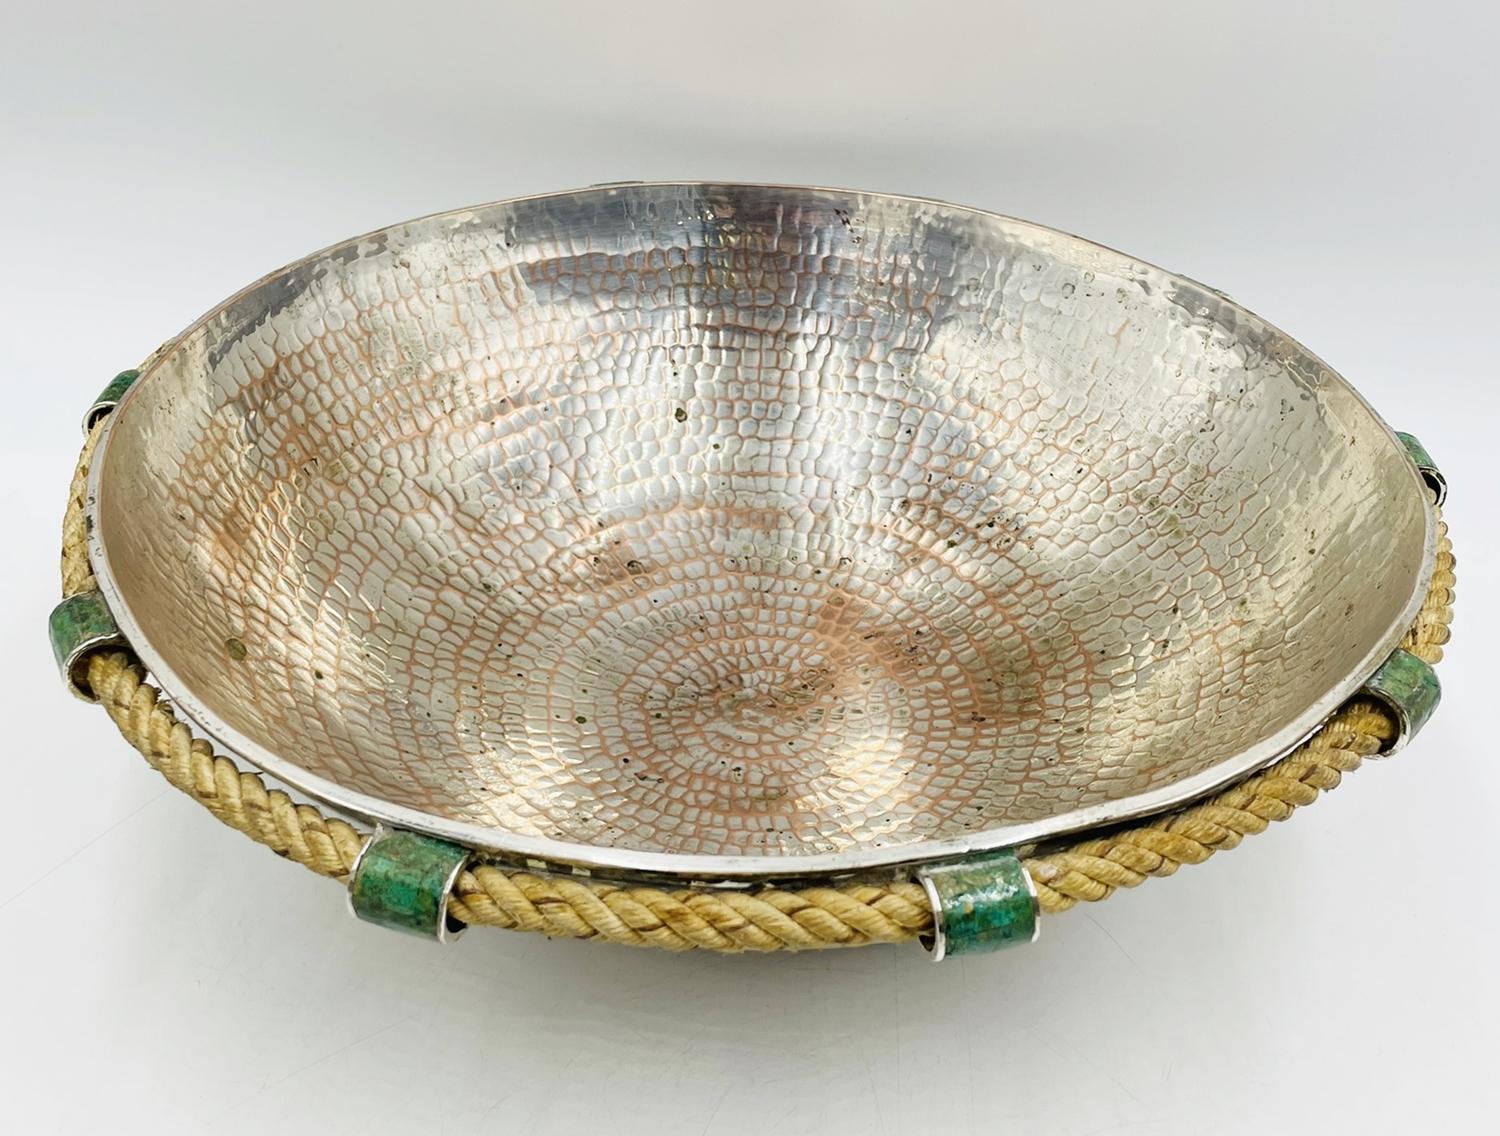 Hand-Crafted Vintage Emilia Castillo Bowl With Rope & Malachite Accents, Mexico 1990's For Sale